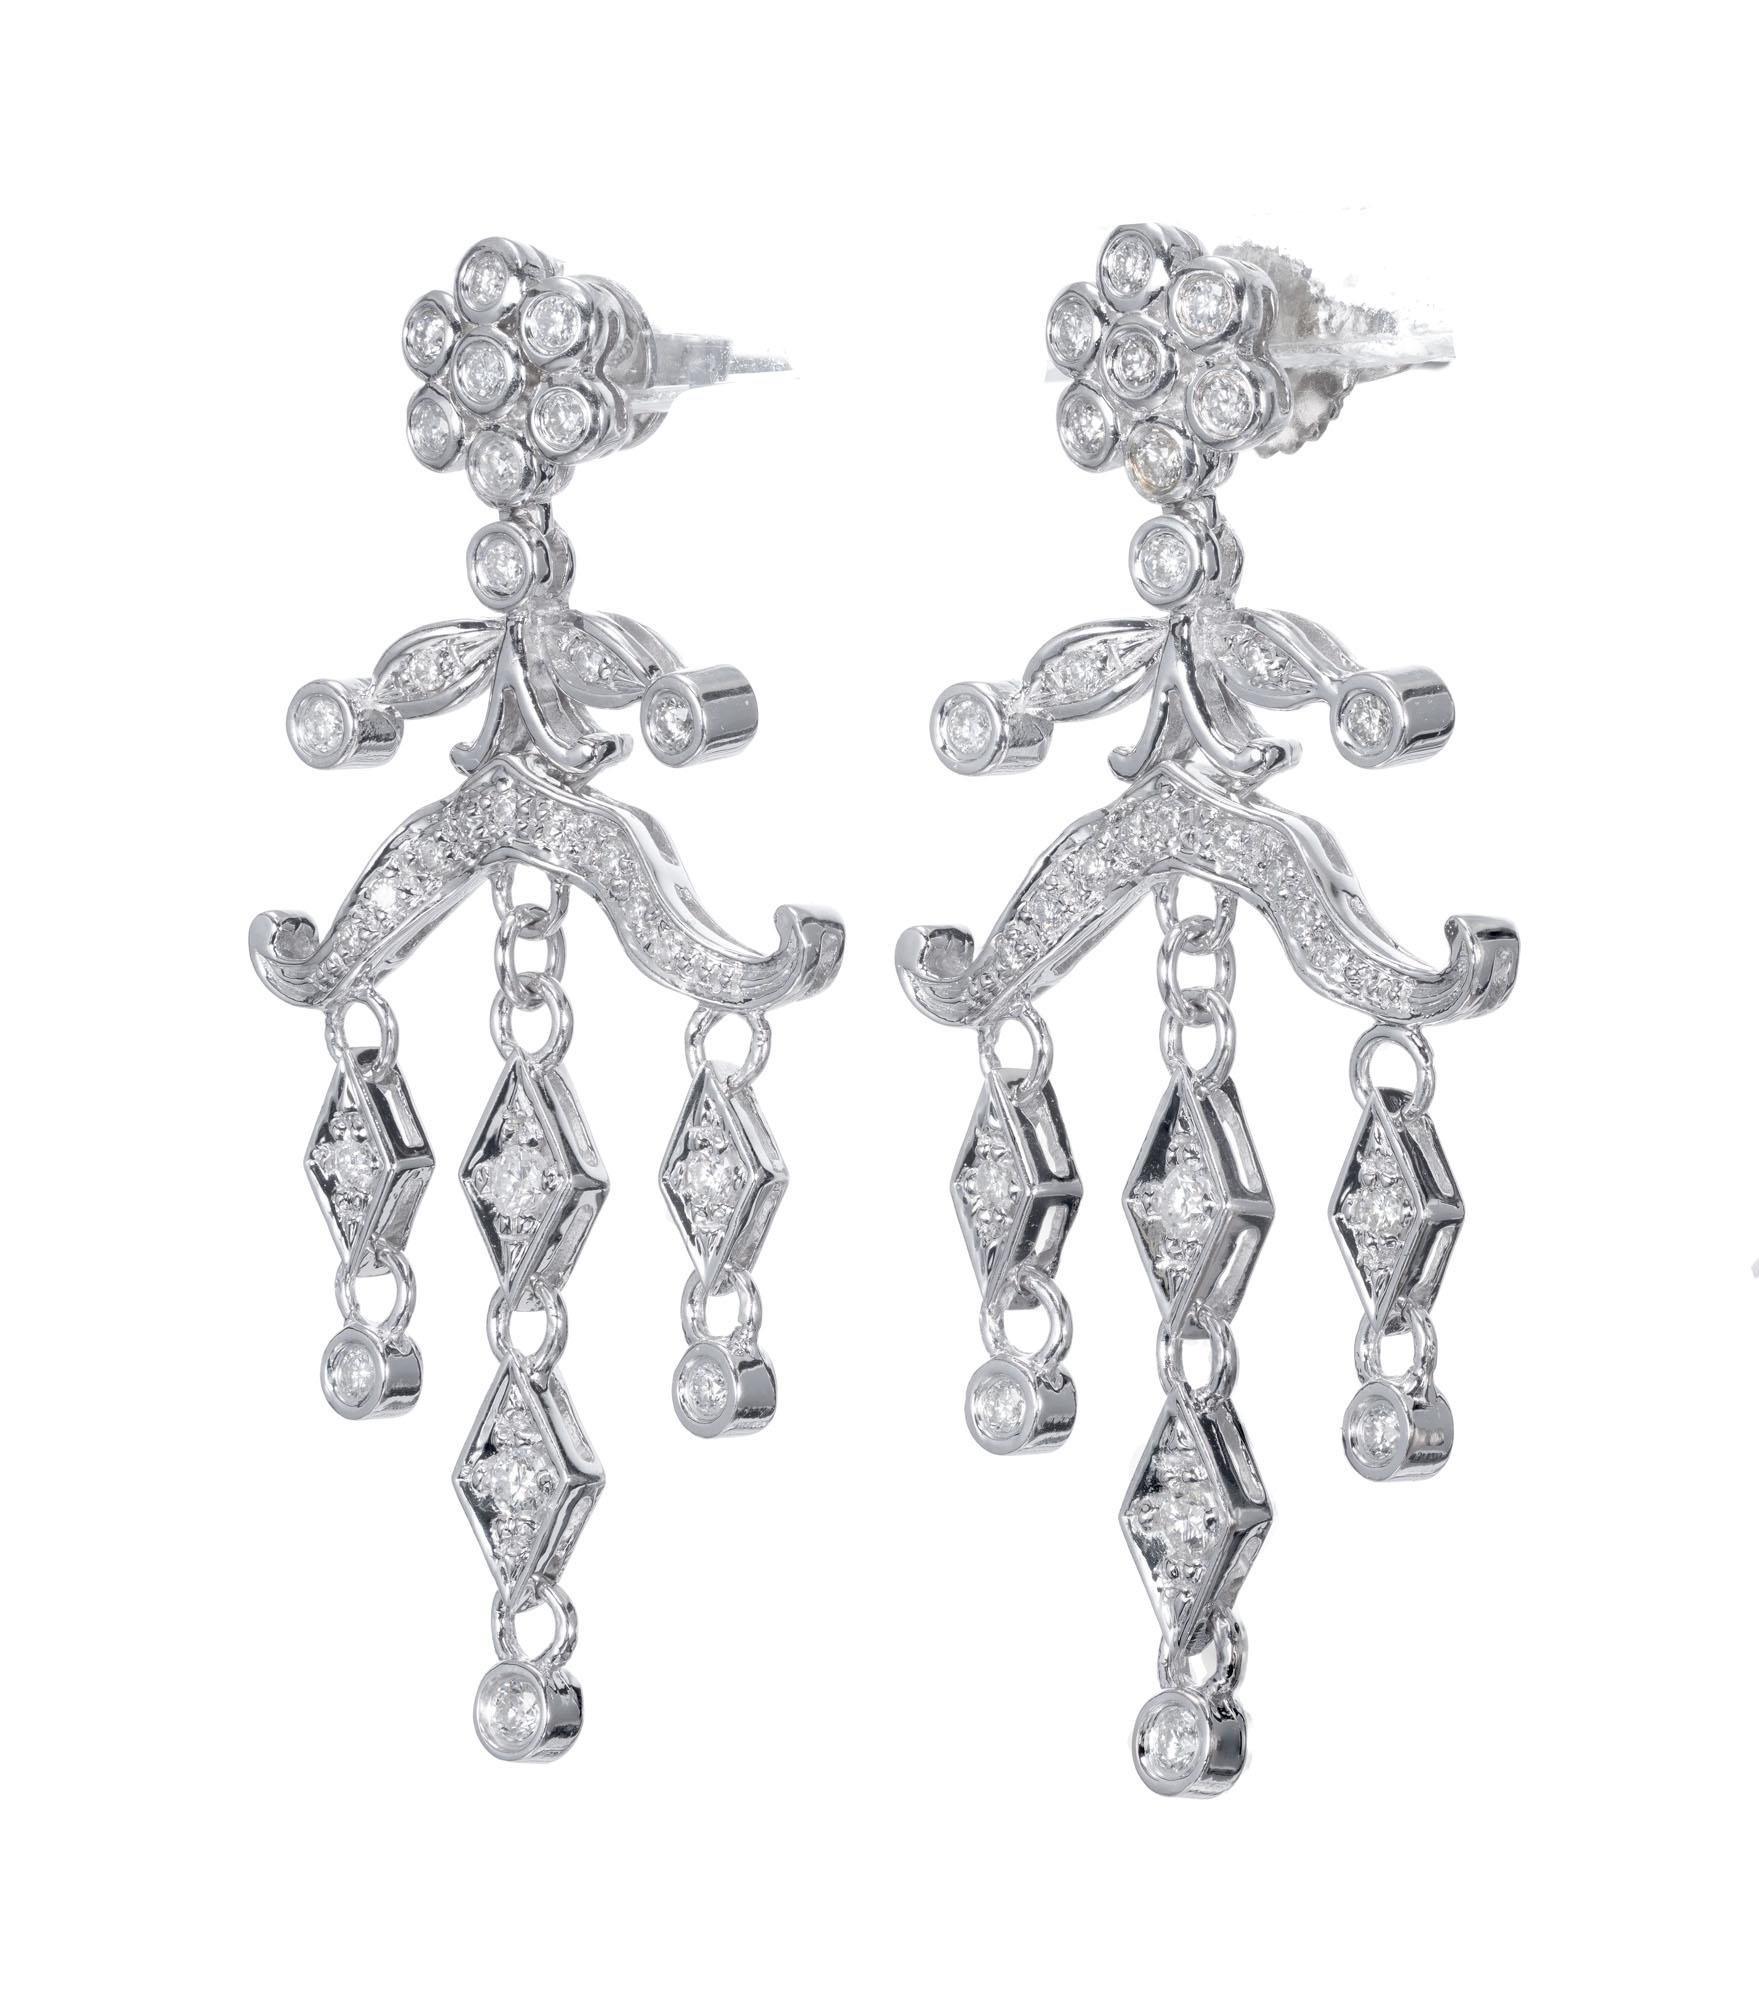 Chandelier style diamond dangle earrings. Set in 14k white gold with a cluster of diamonds at the top, two tiers and  of round accent diamonds.

56 Diamonds approx total weight .60cts
Length: 1.65 inches or 41.97mm
Width: .82 inches or